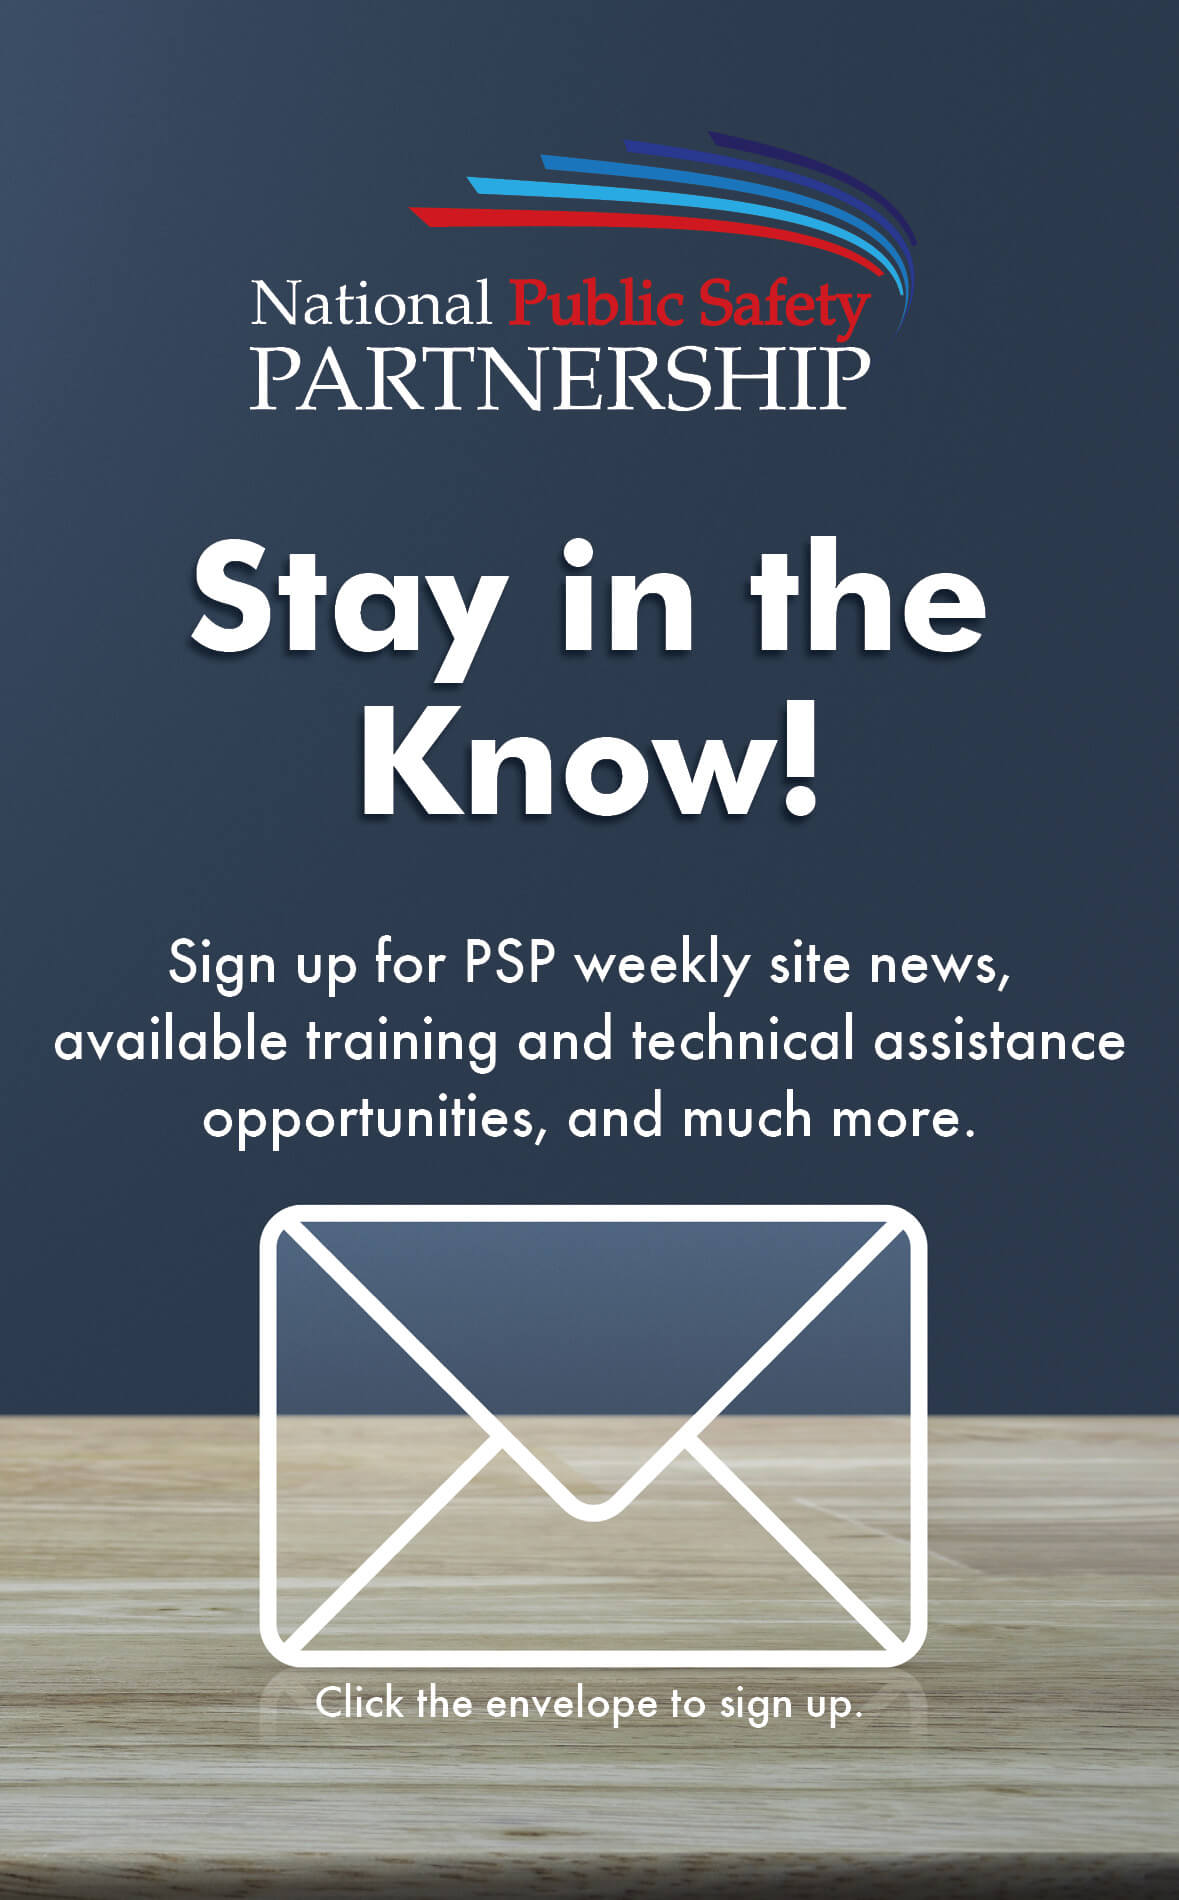 Stay in the Know. Sign up for PSP weekly site news.